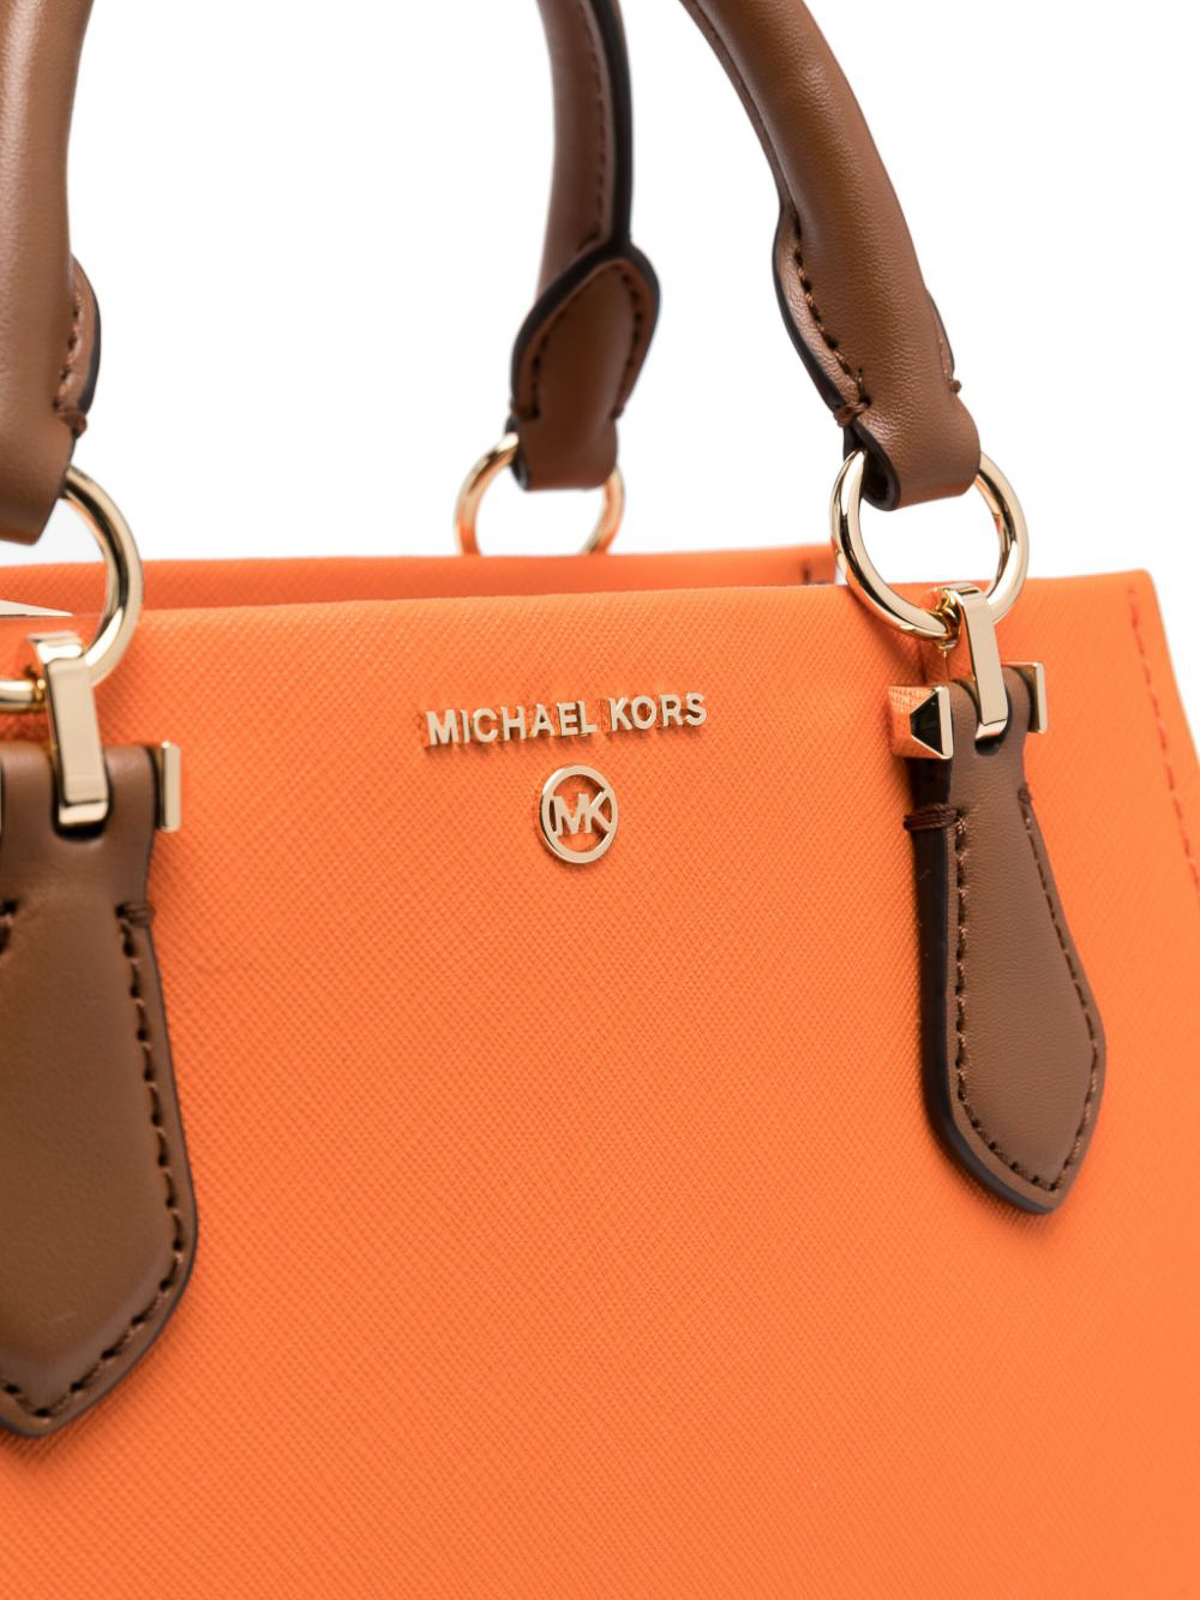 Totes bags Michael Michael Kors - Marilyn small leather crossbody bag -  32S2G6AC1T910